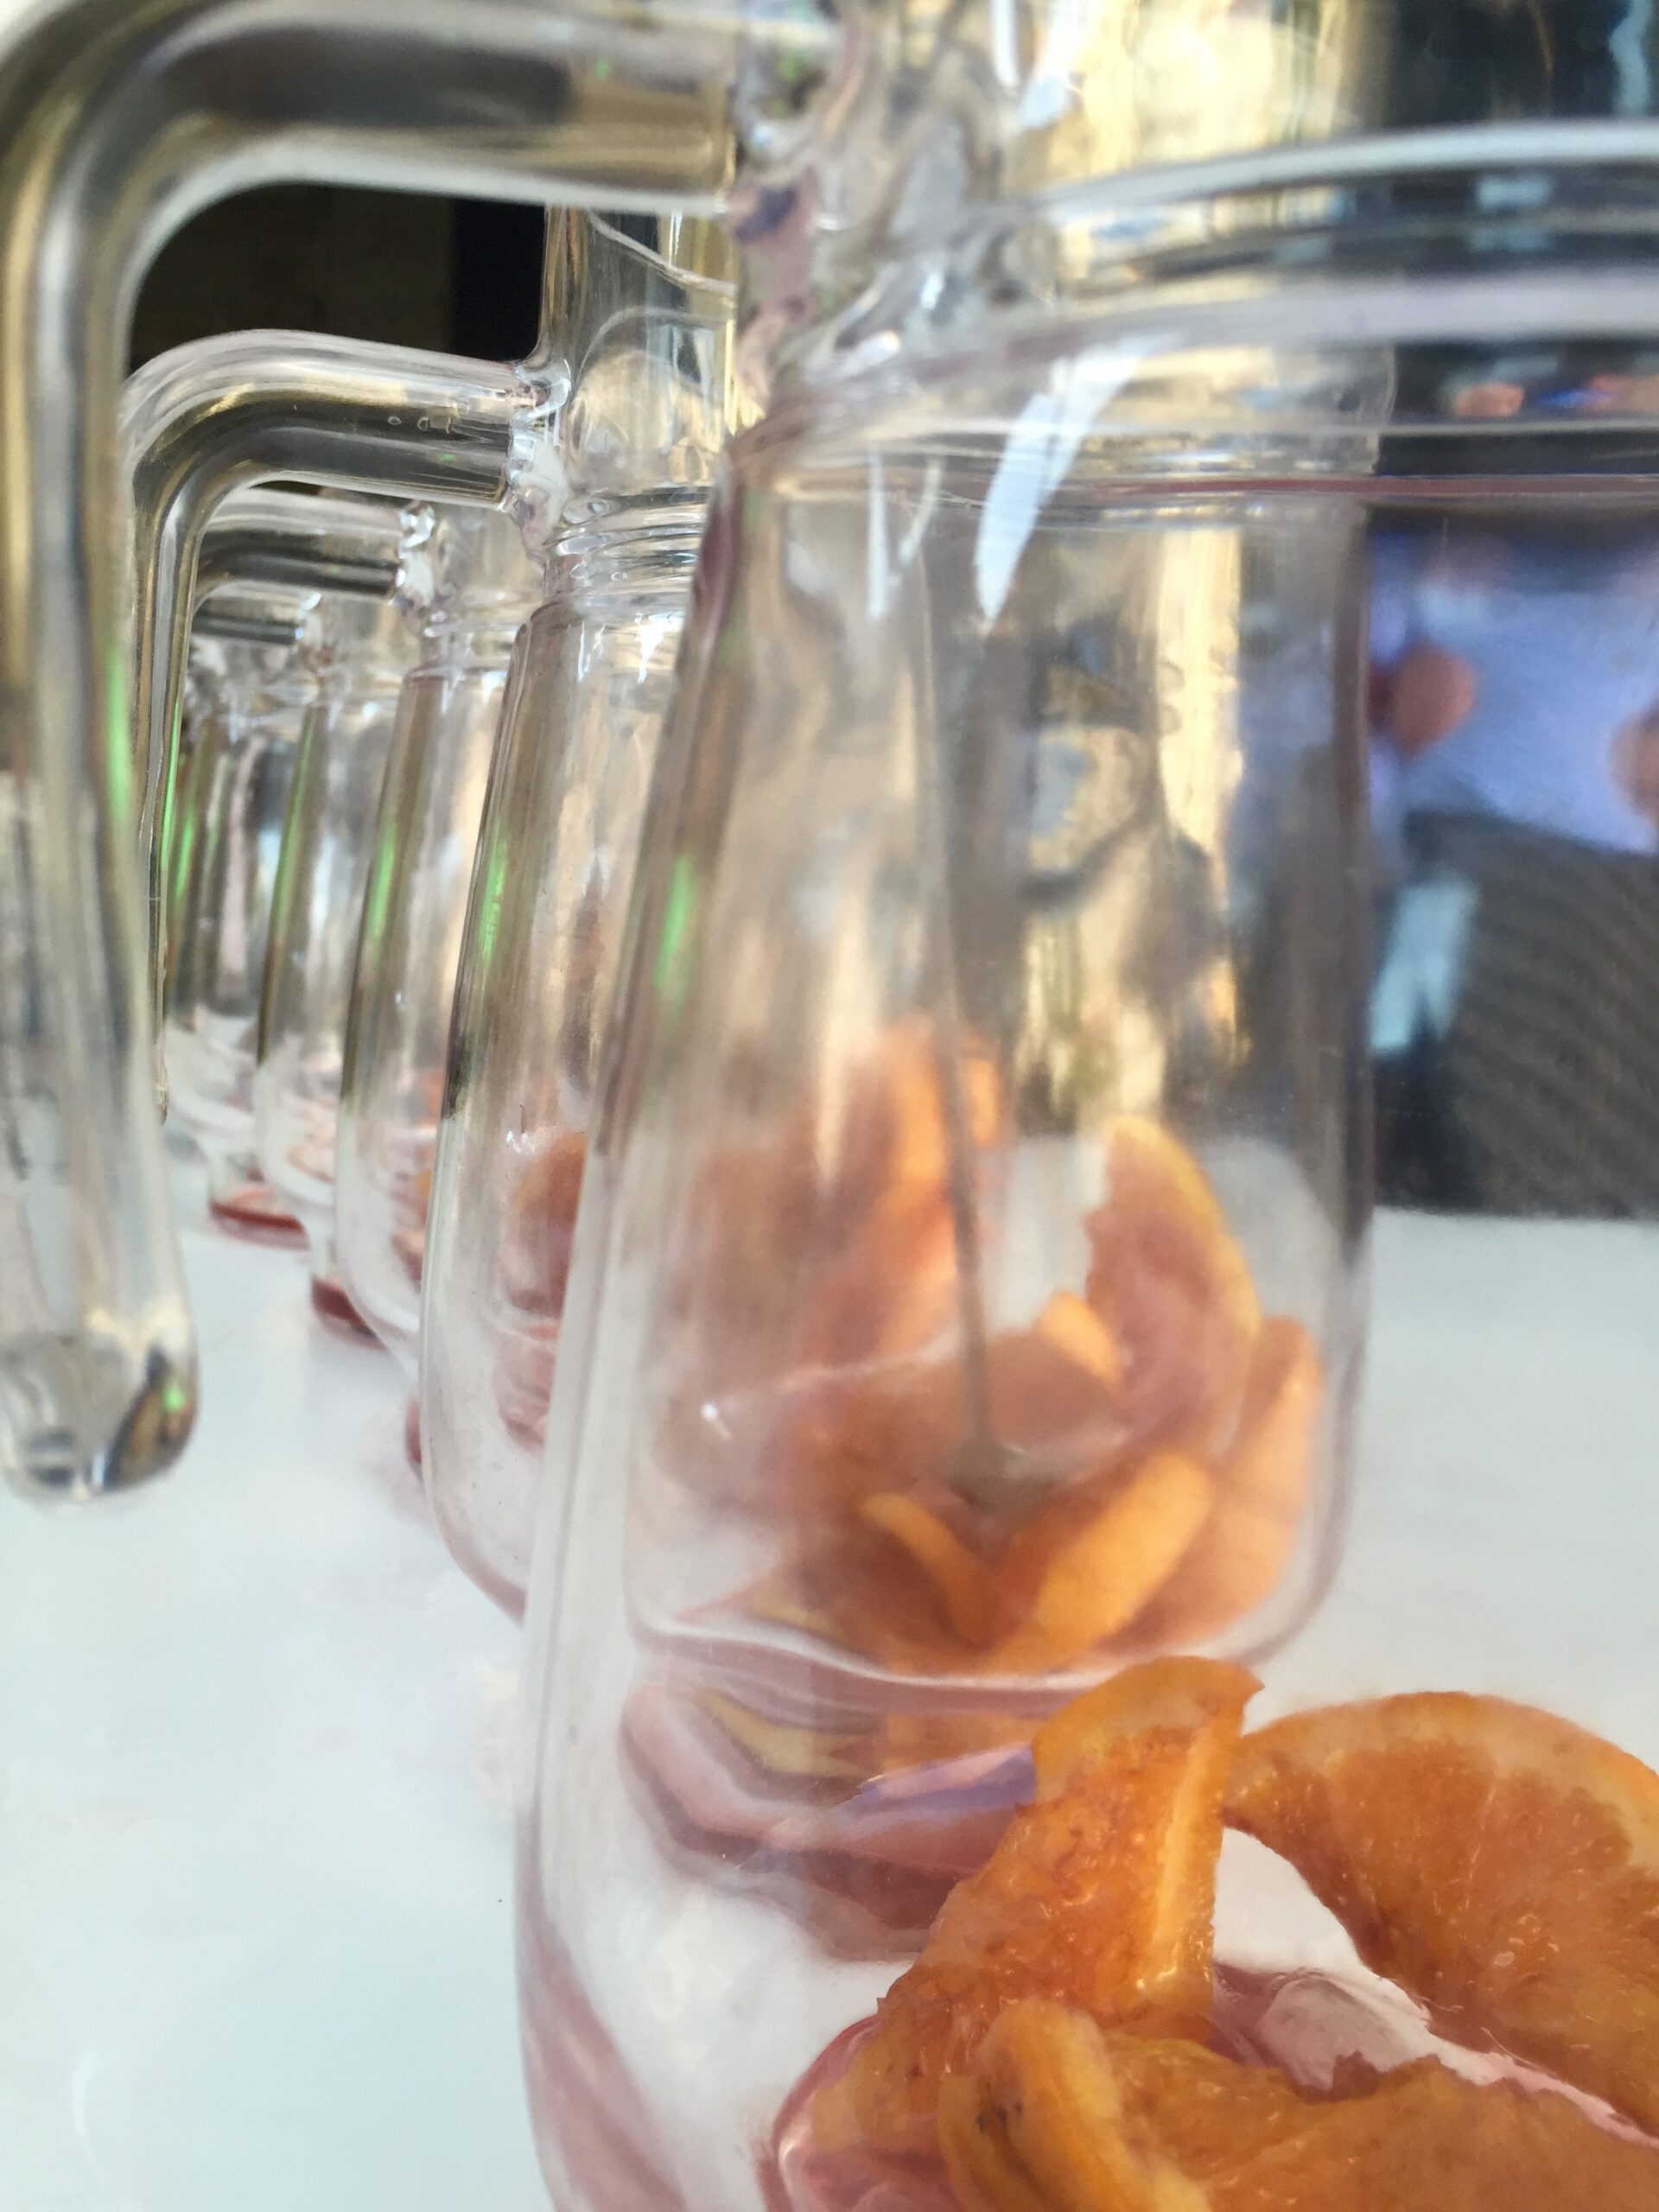 Pitchers of sangria sit on a table at Cafe Iruña in Pamplona, Spain.